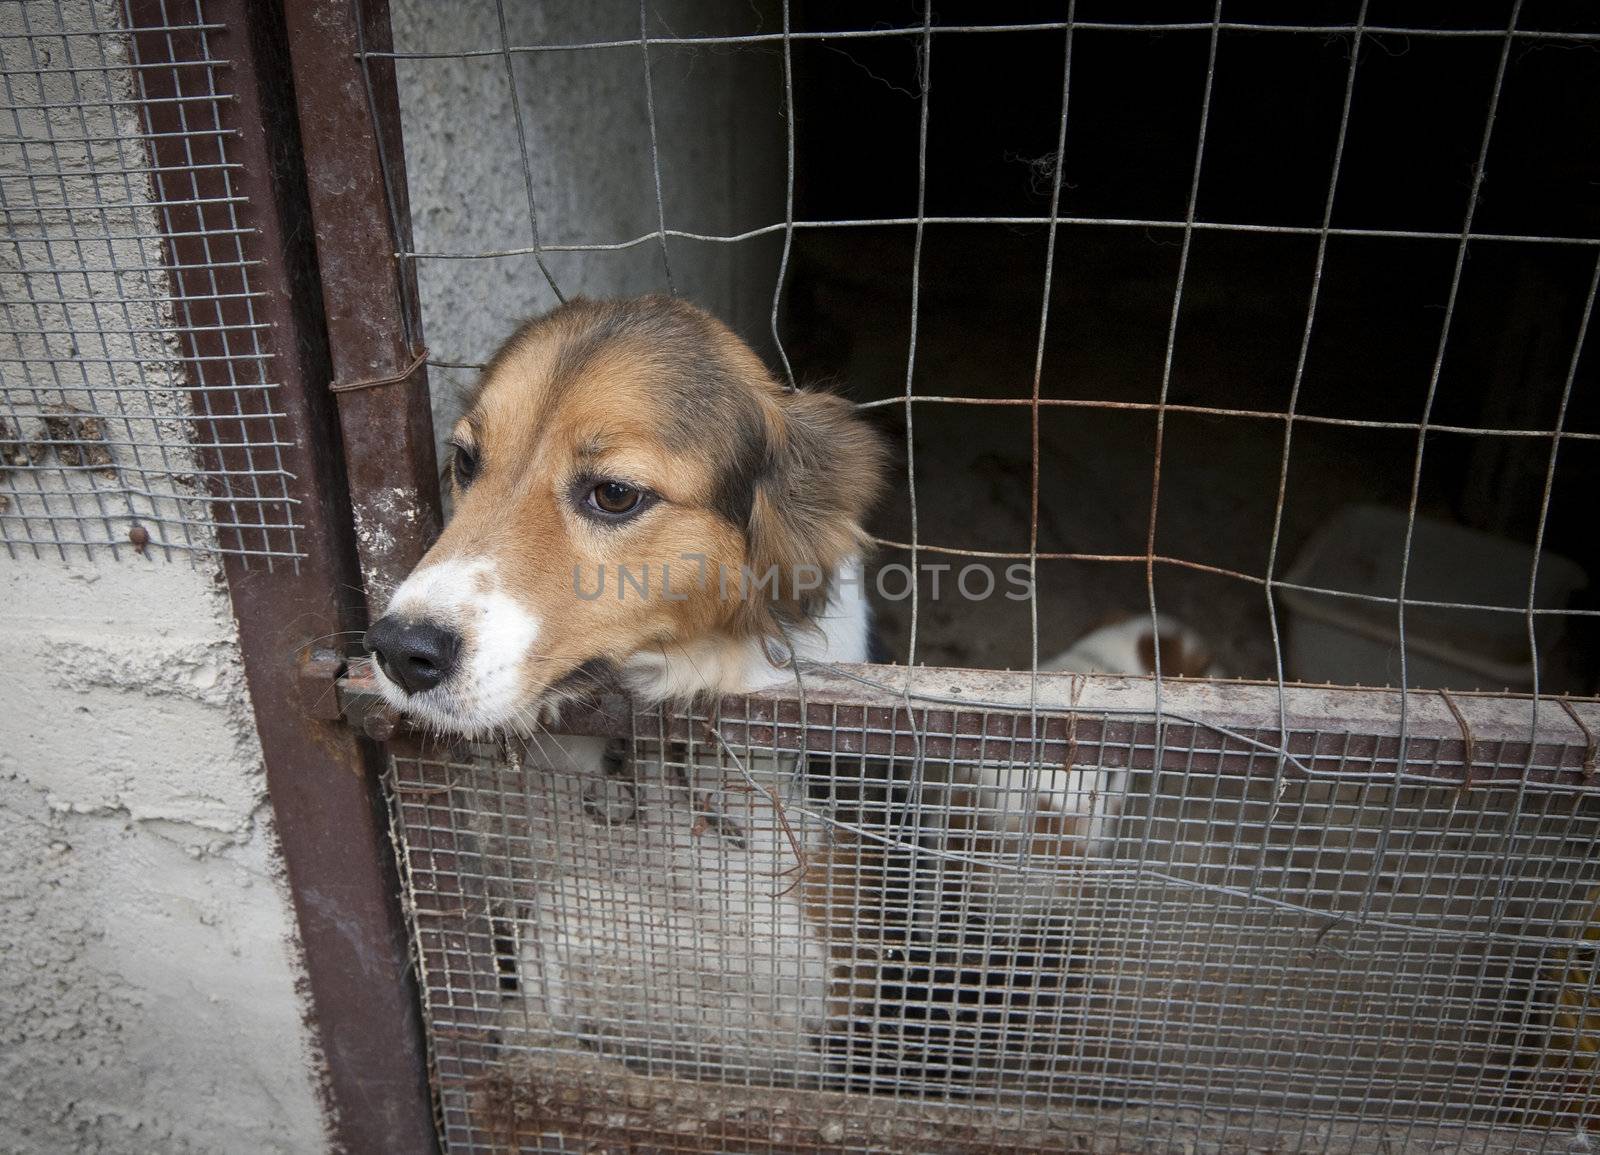 Cute dog under lock and key looking out into the freedom -  region of Campania Italy.